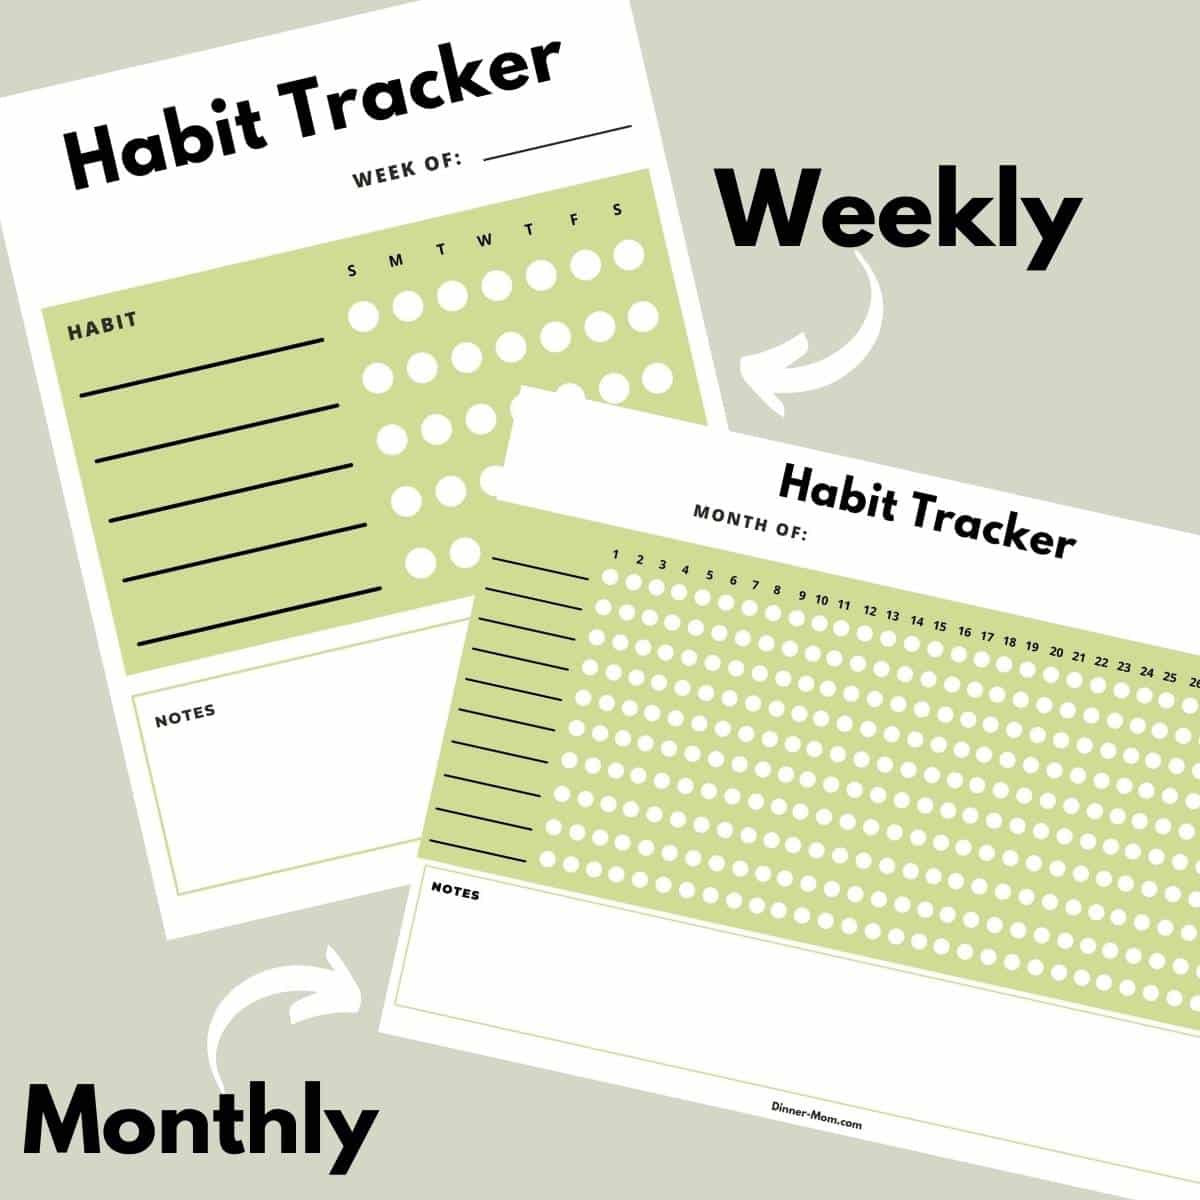 Collage with weekly and Monthly habit trackers